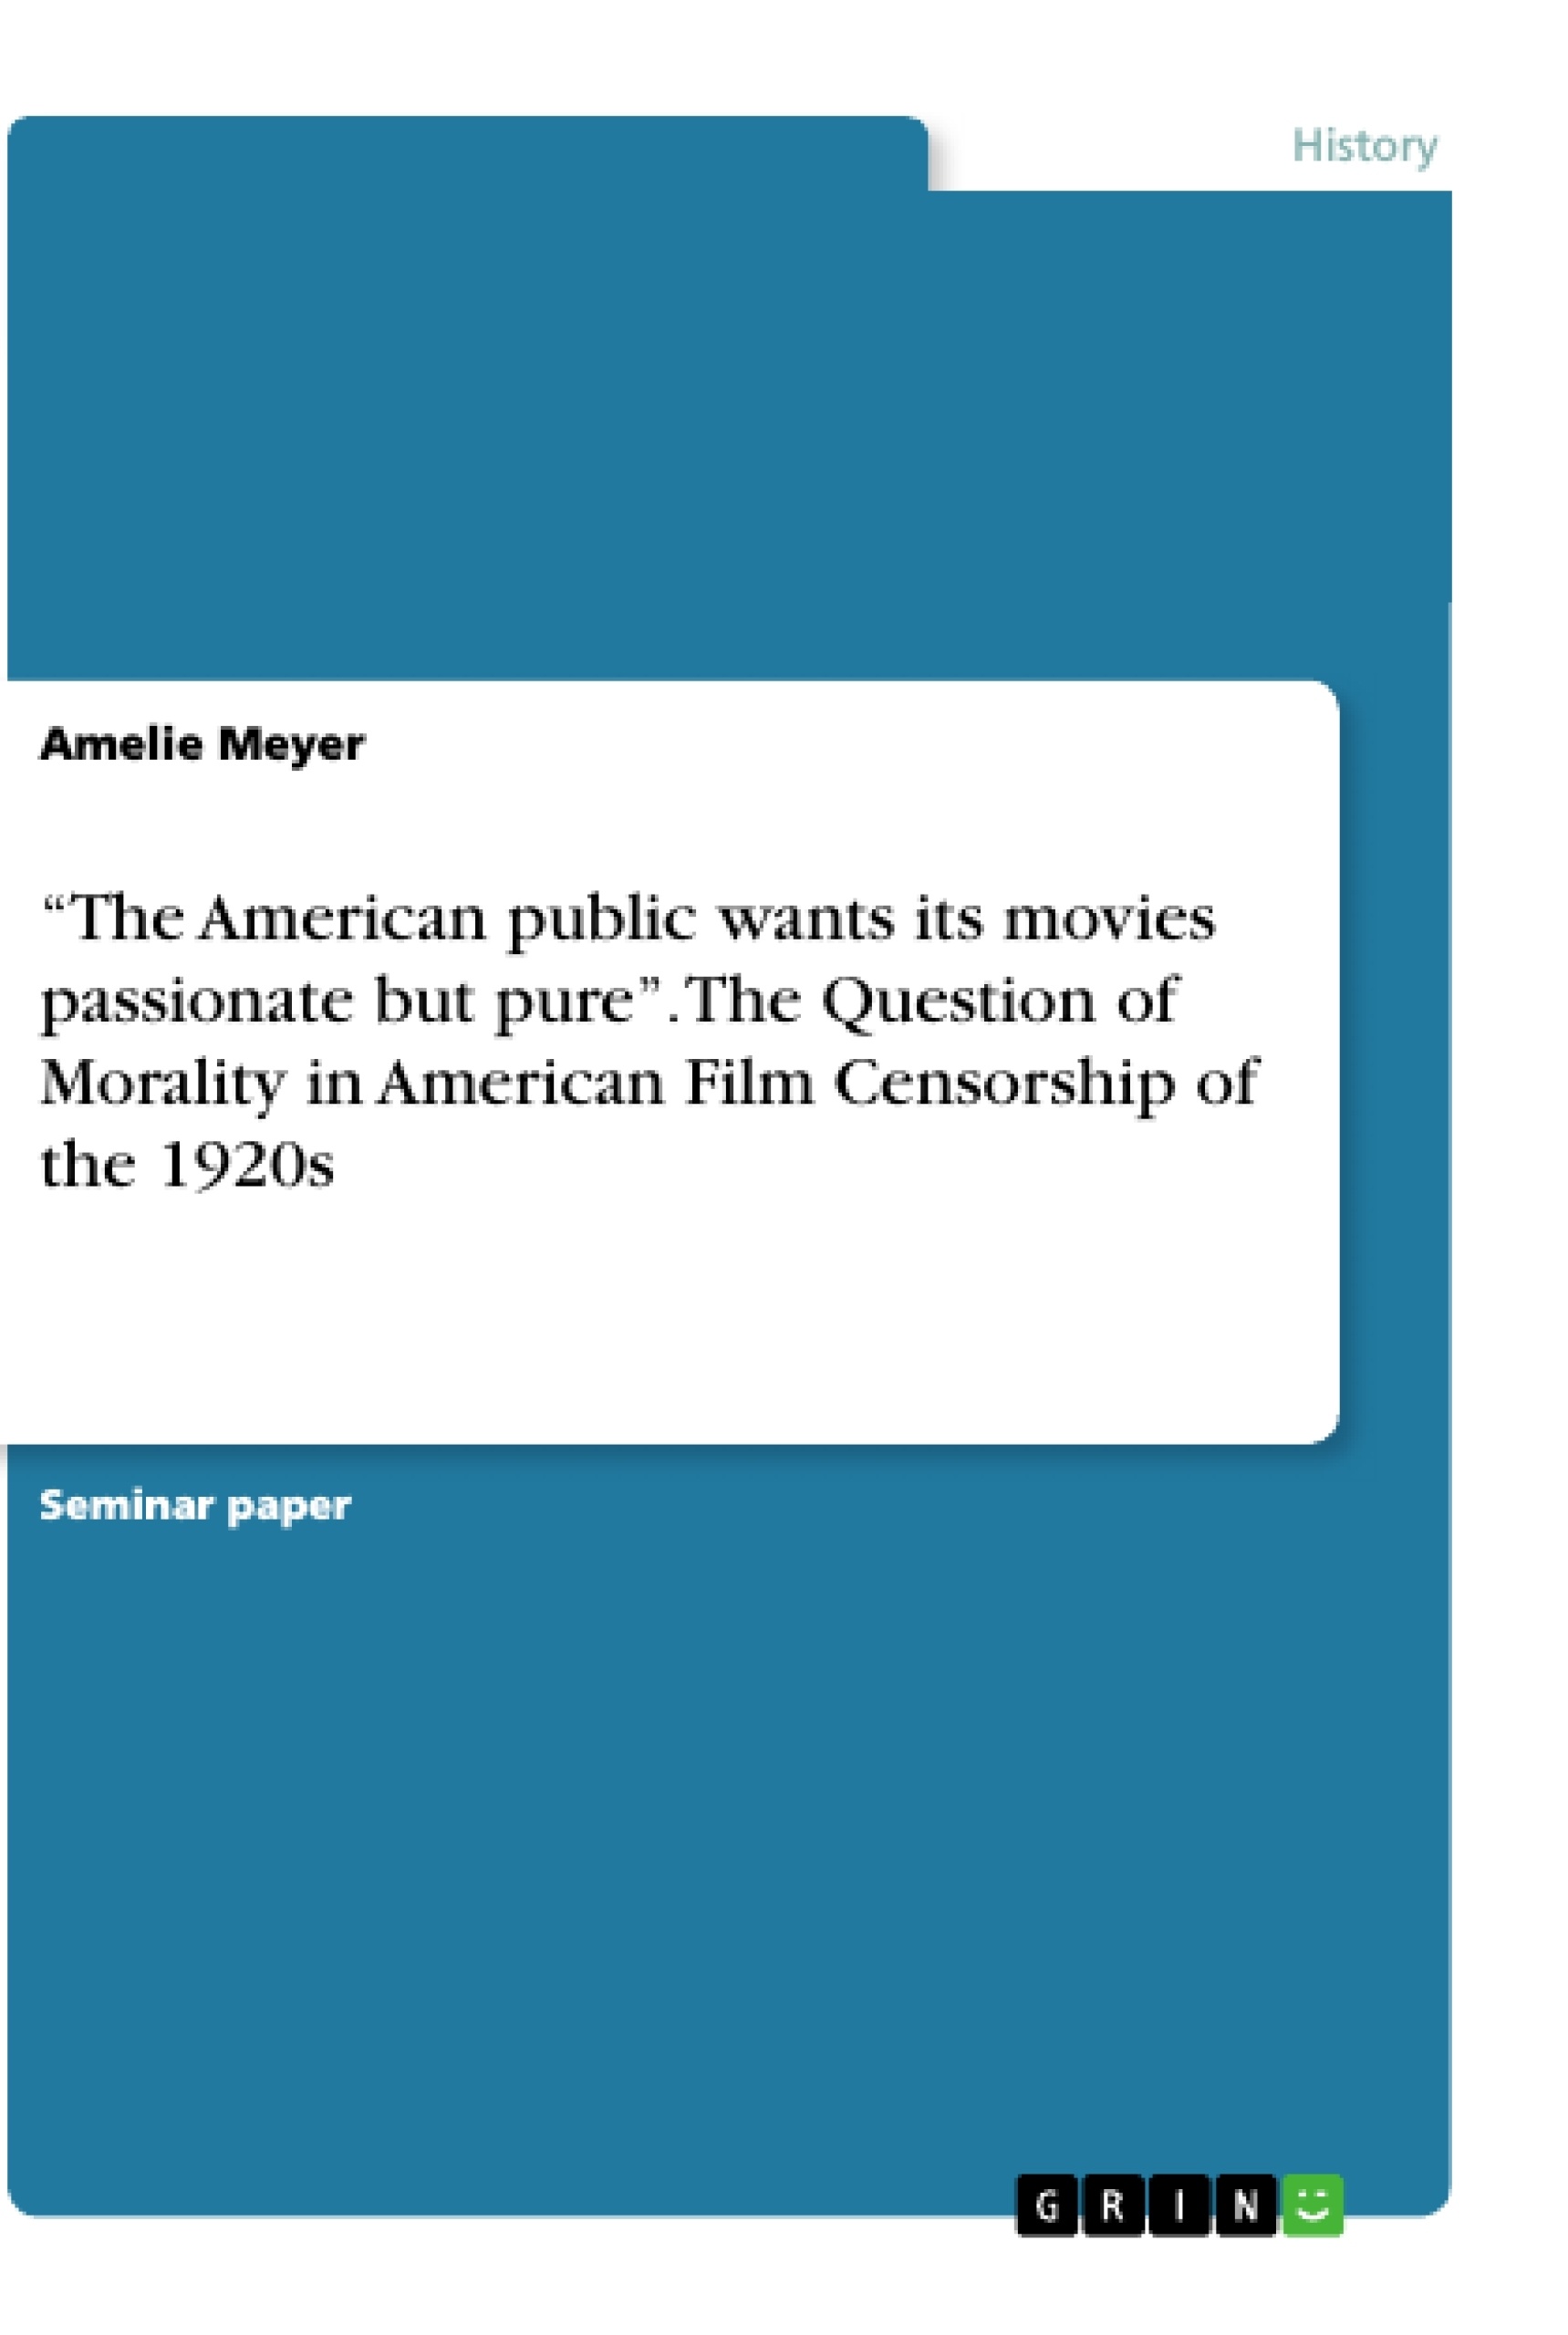 Title: “The American public wants its movies passionate but pure”. The Question of Morality in American Film Censorship of the 1920s